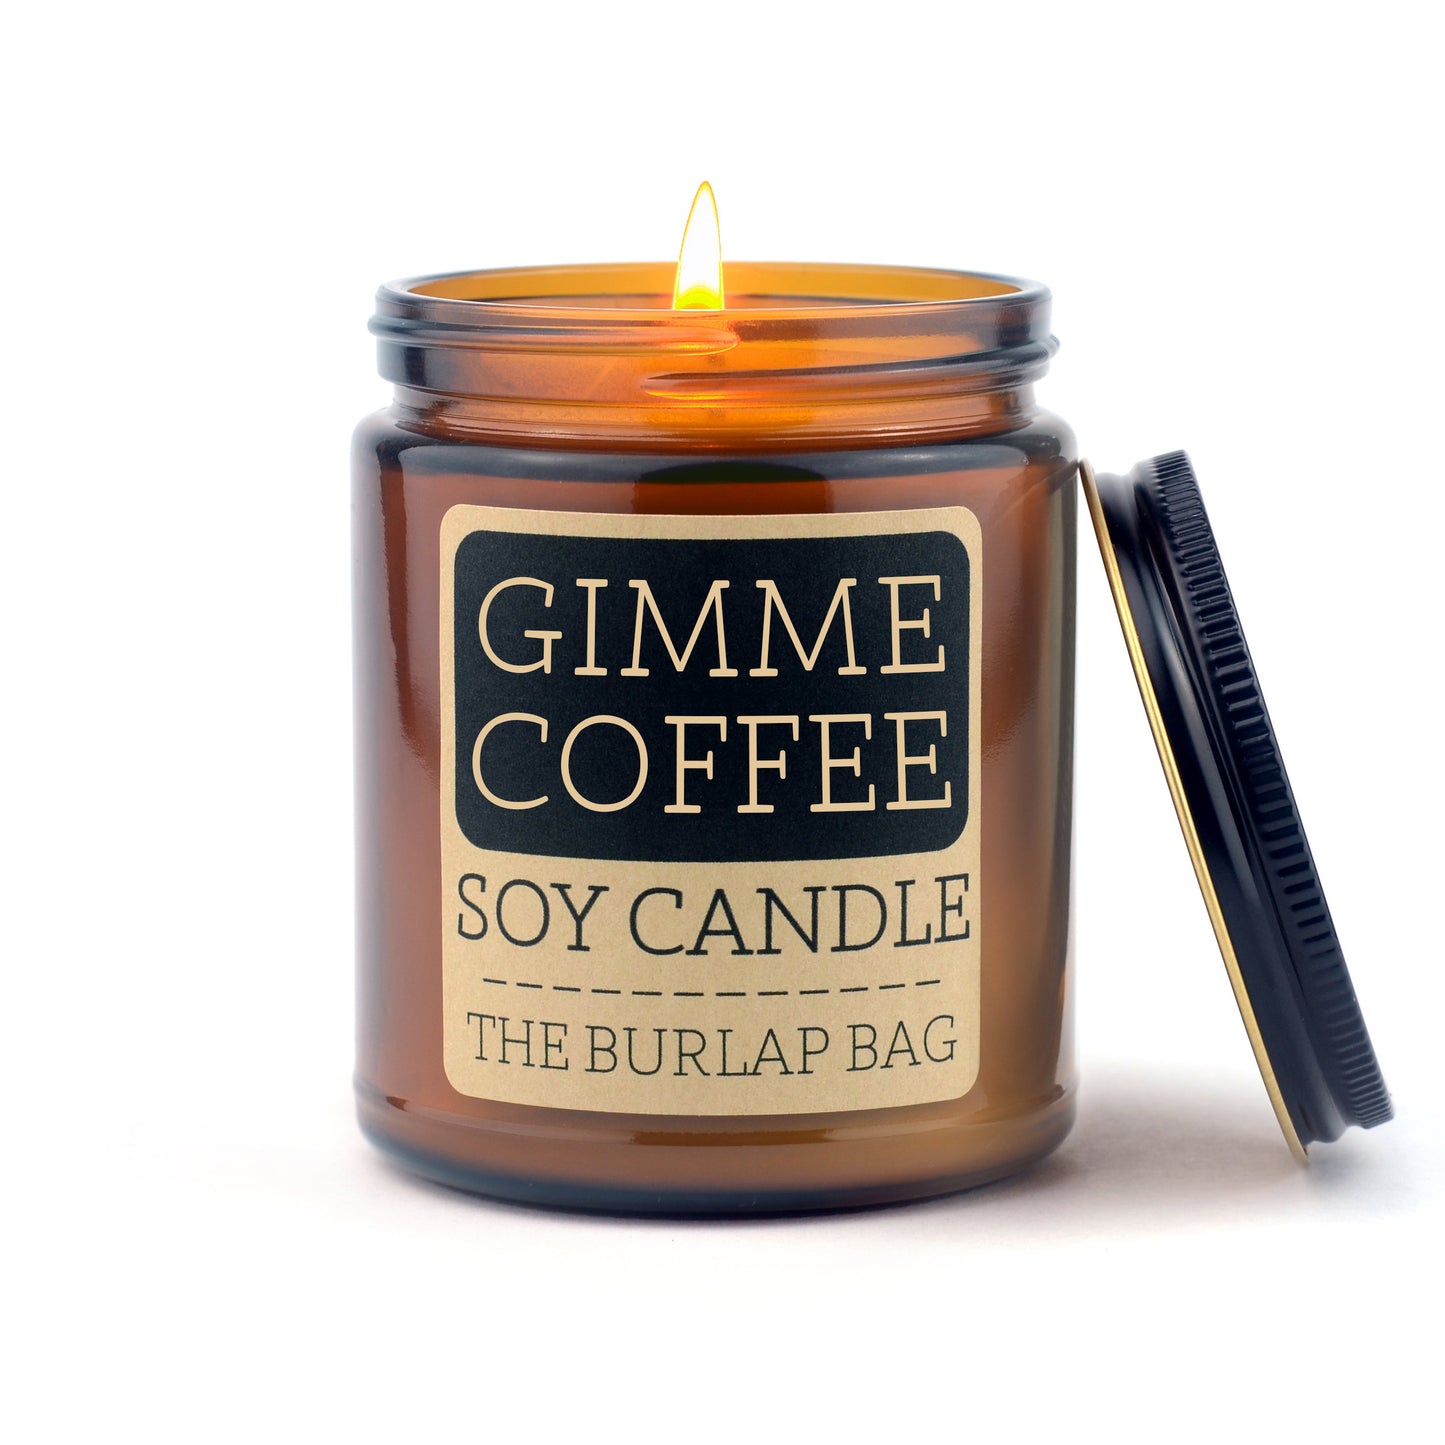 Gimme Coffee - Soy Candle 9oz